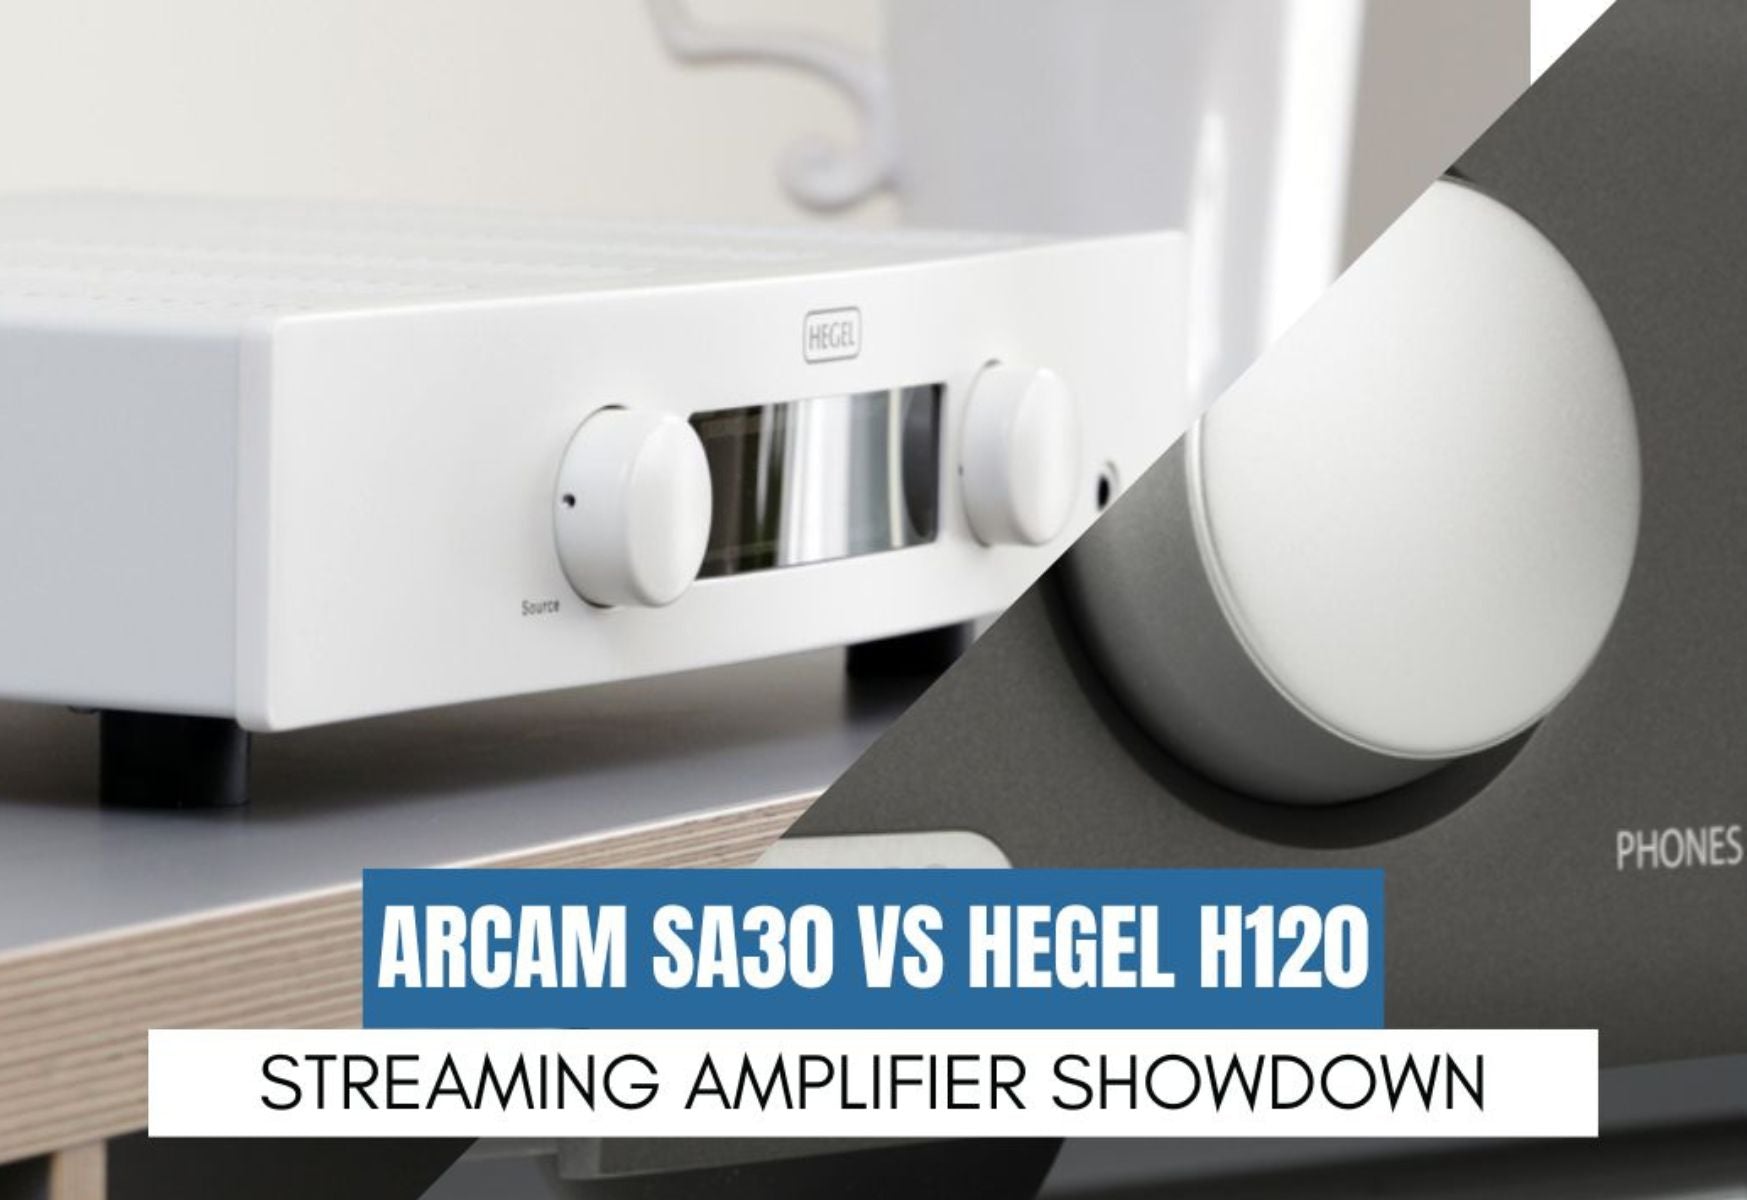 Arcam SA30 vs Hegel H120 - Which Streaming Amplifier is Right For You?